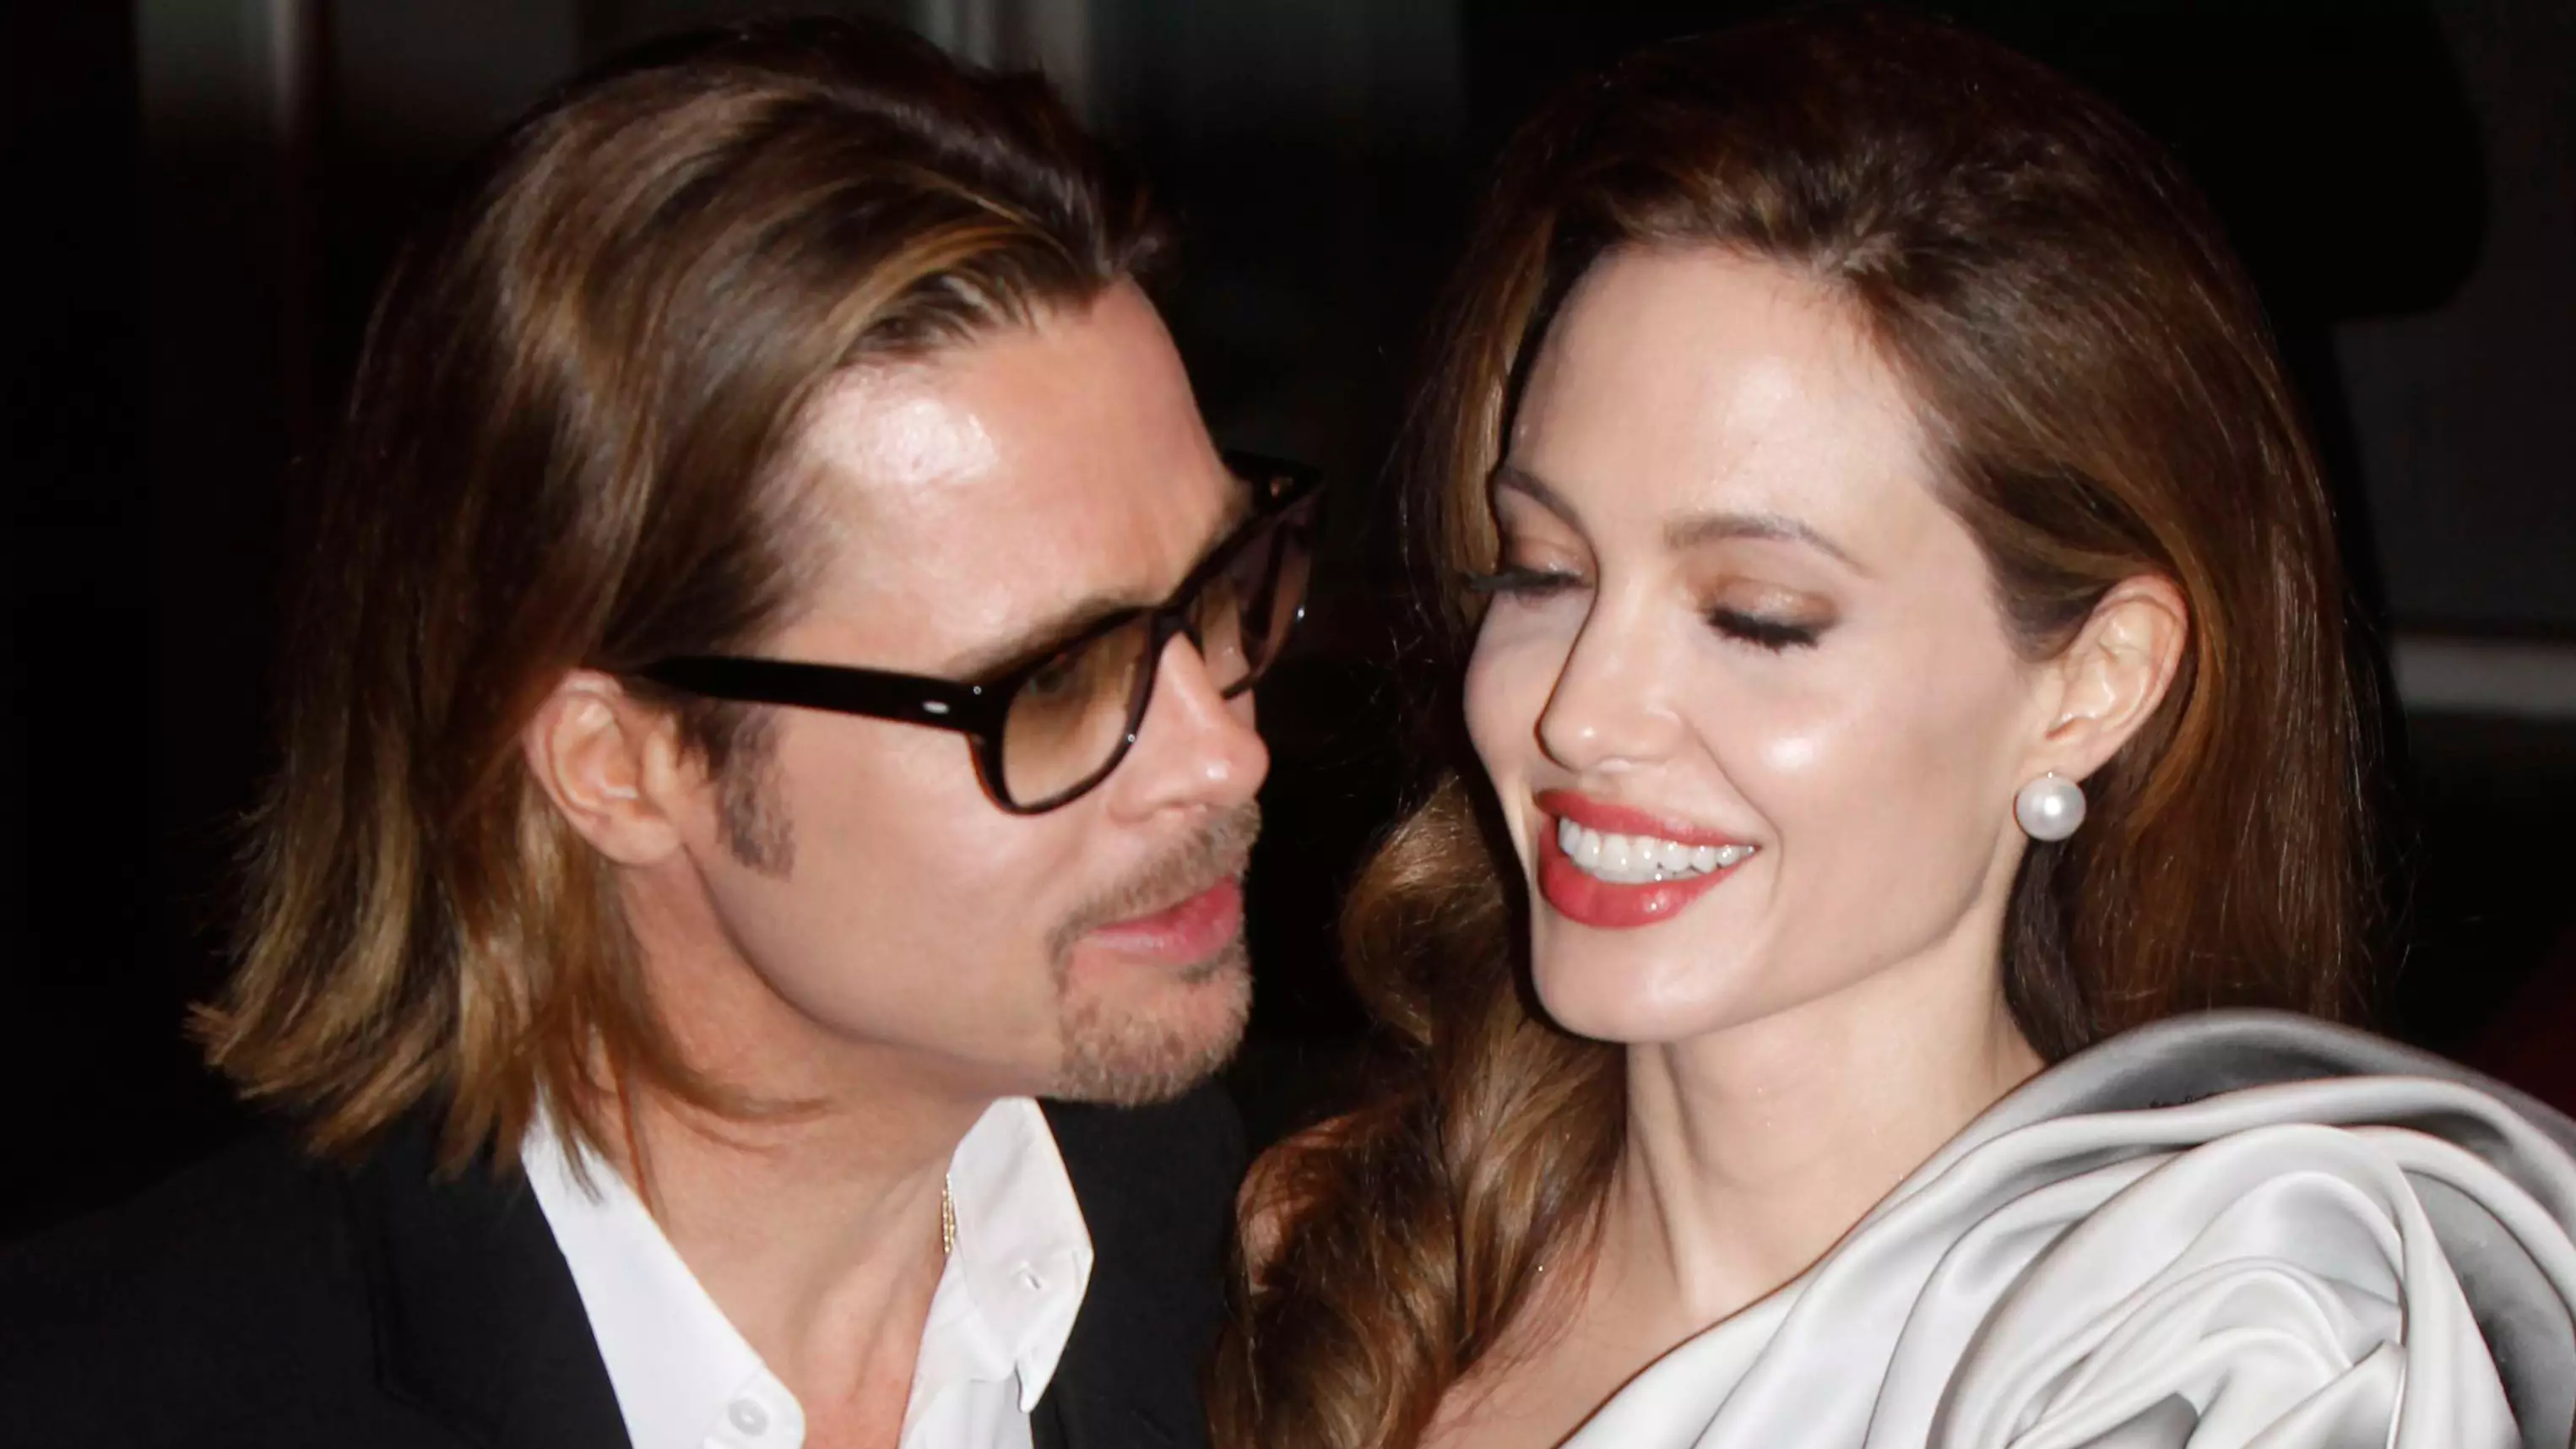 Brad Pitt Wins Joint Custody Of His Kids After Five-Year Battle With Angelina Jolie